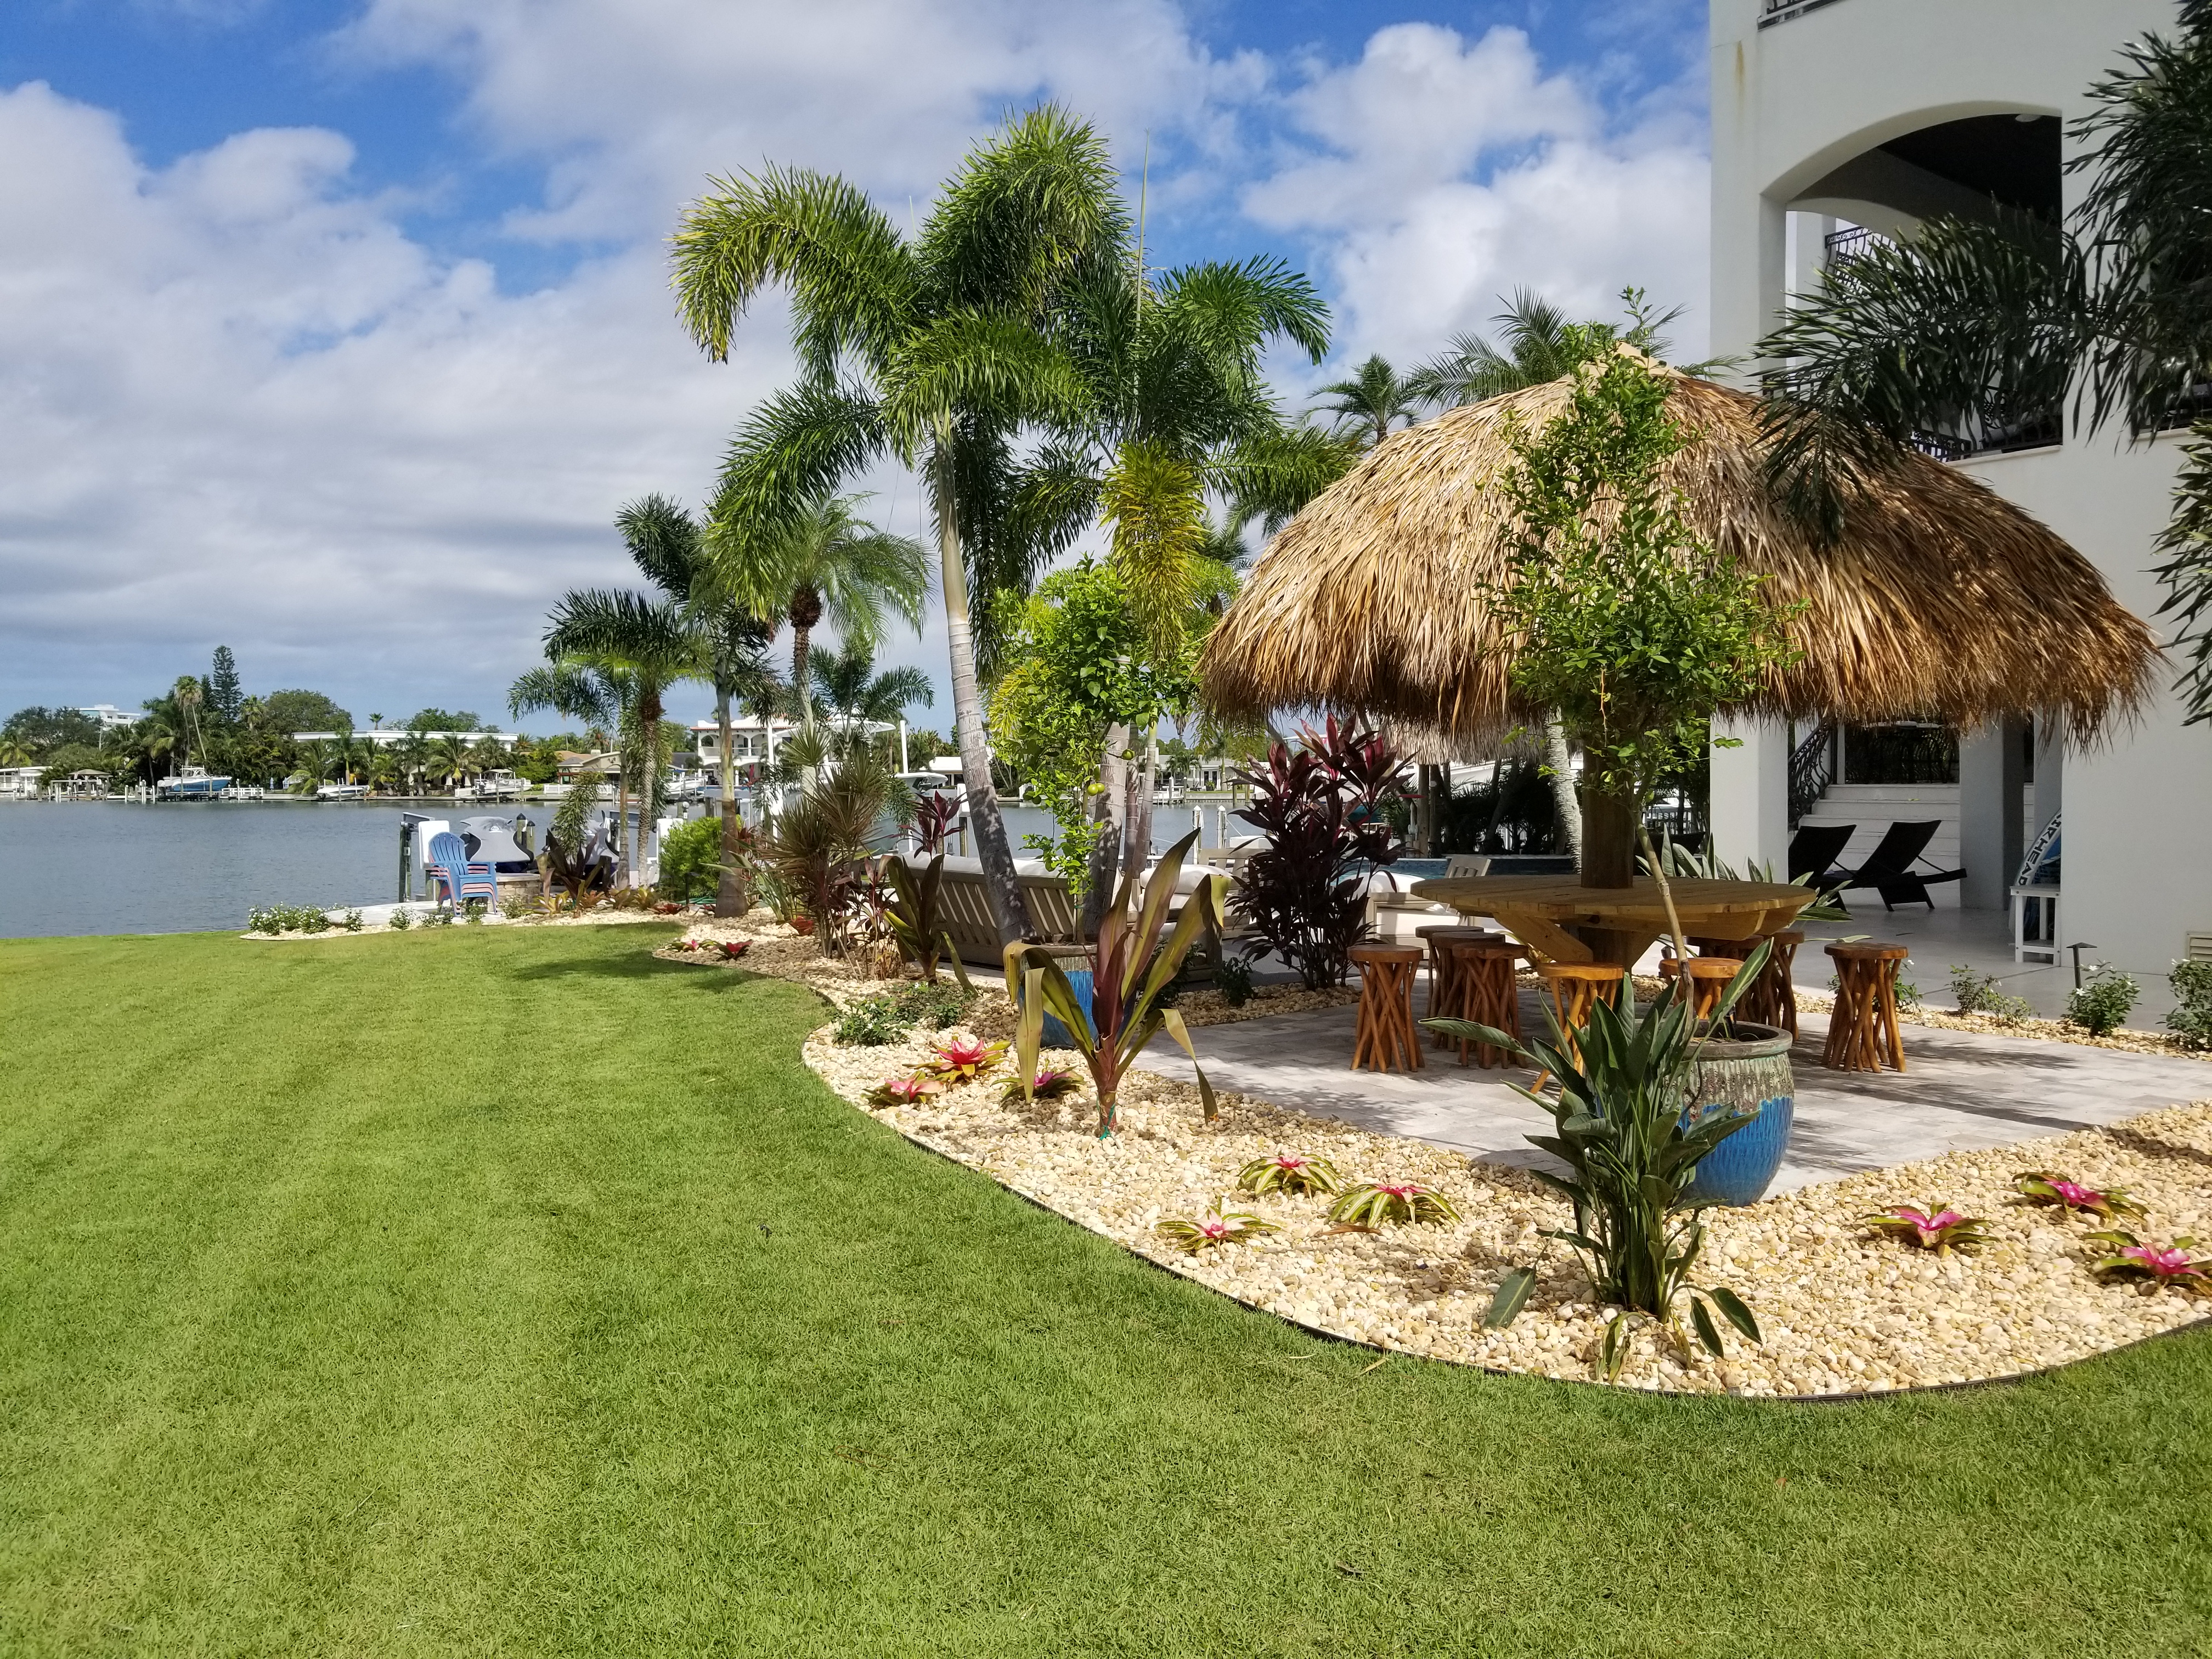 Home in Saint Petersburg, FL with professional lawn care and landscaping services.